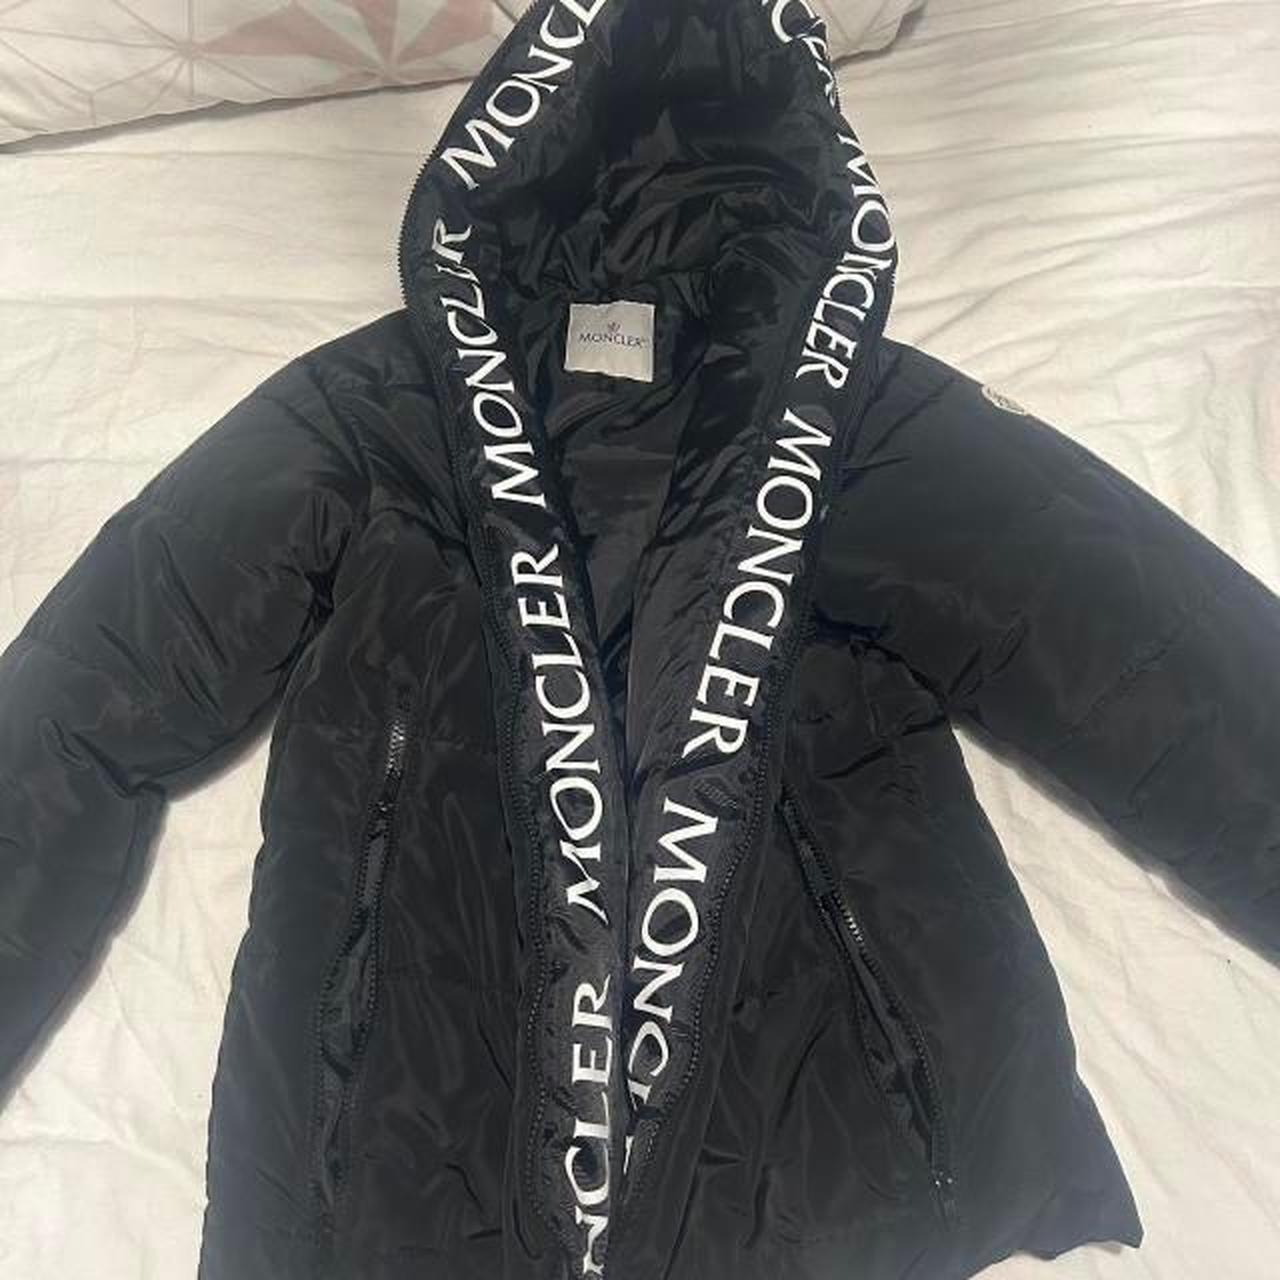 Mens Moncler jacket in great condition only worn a... - Depop